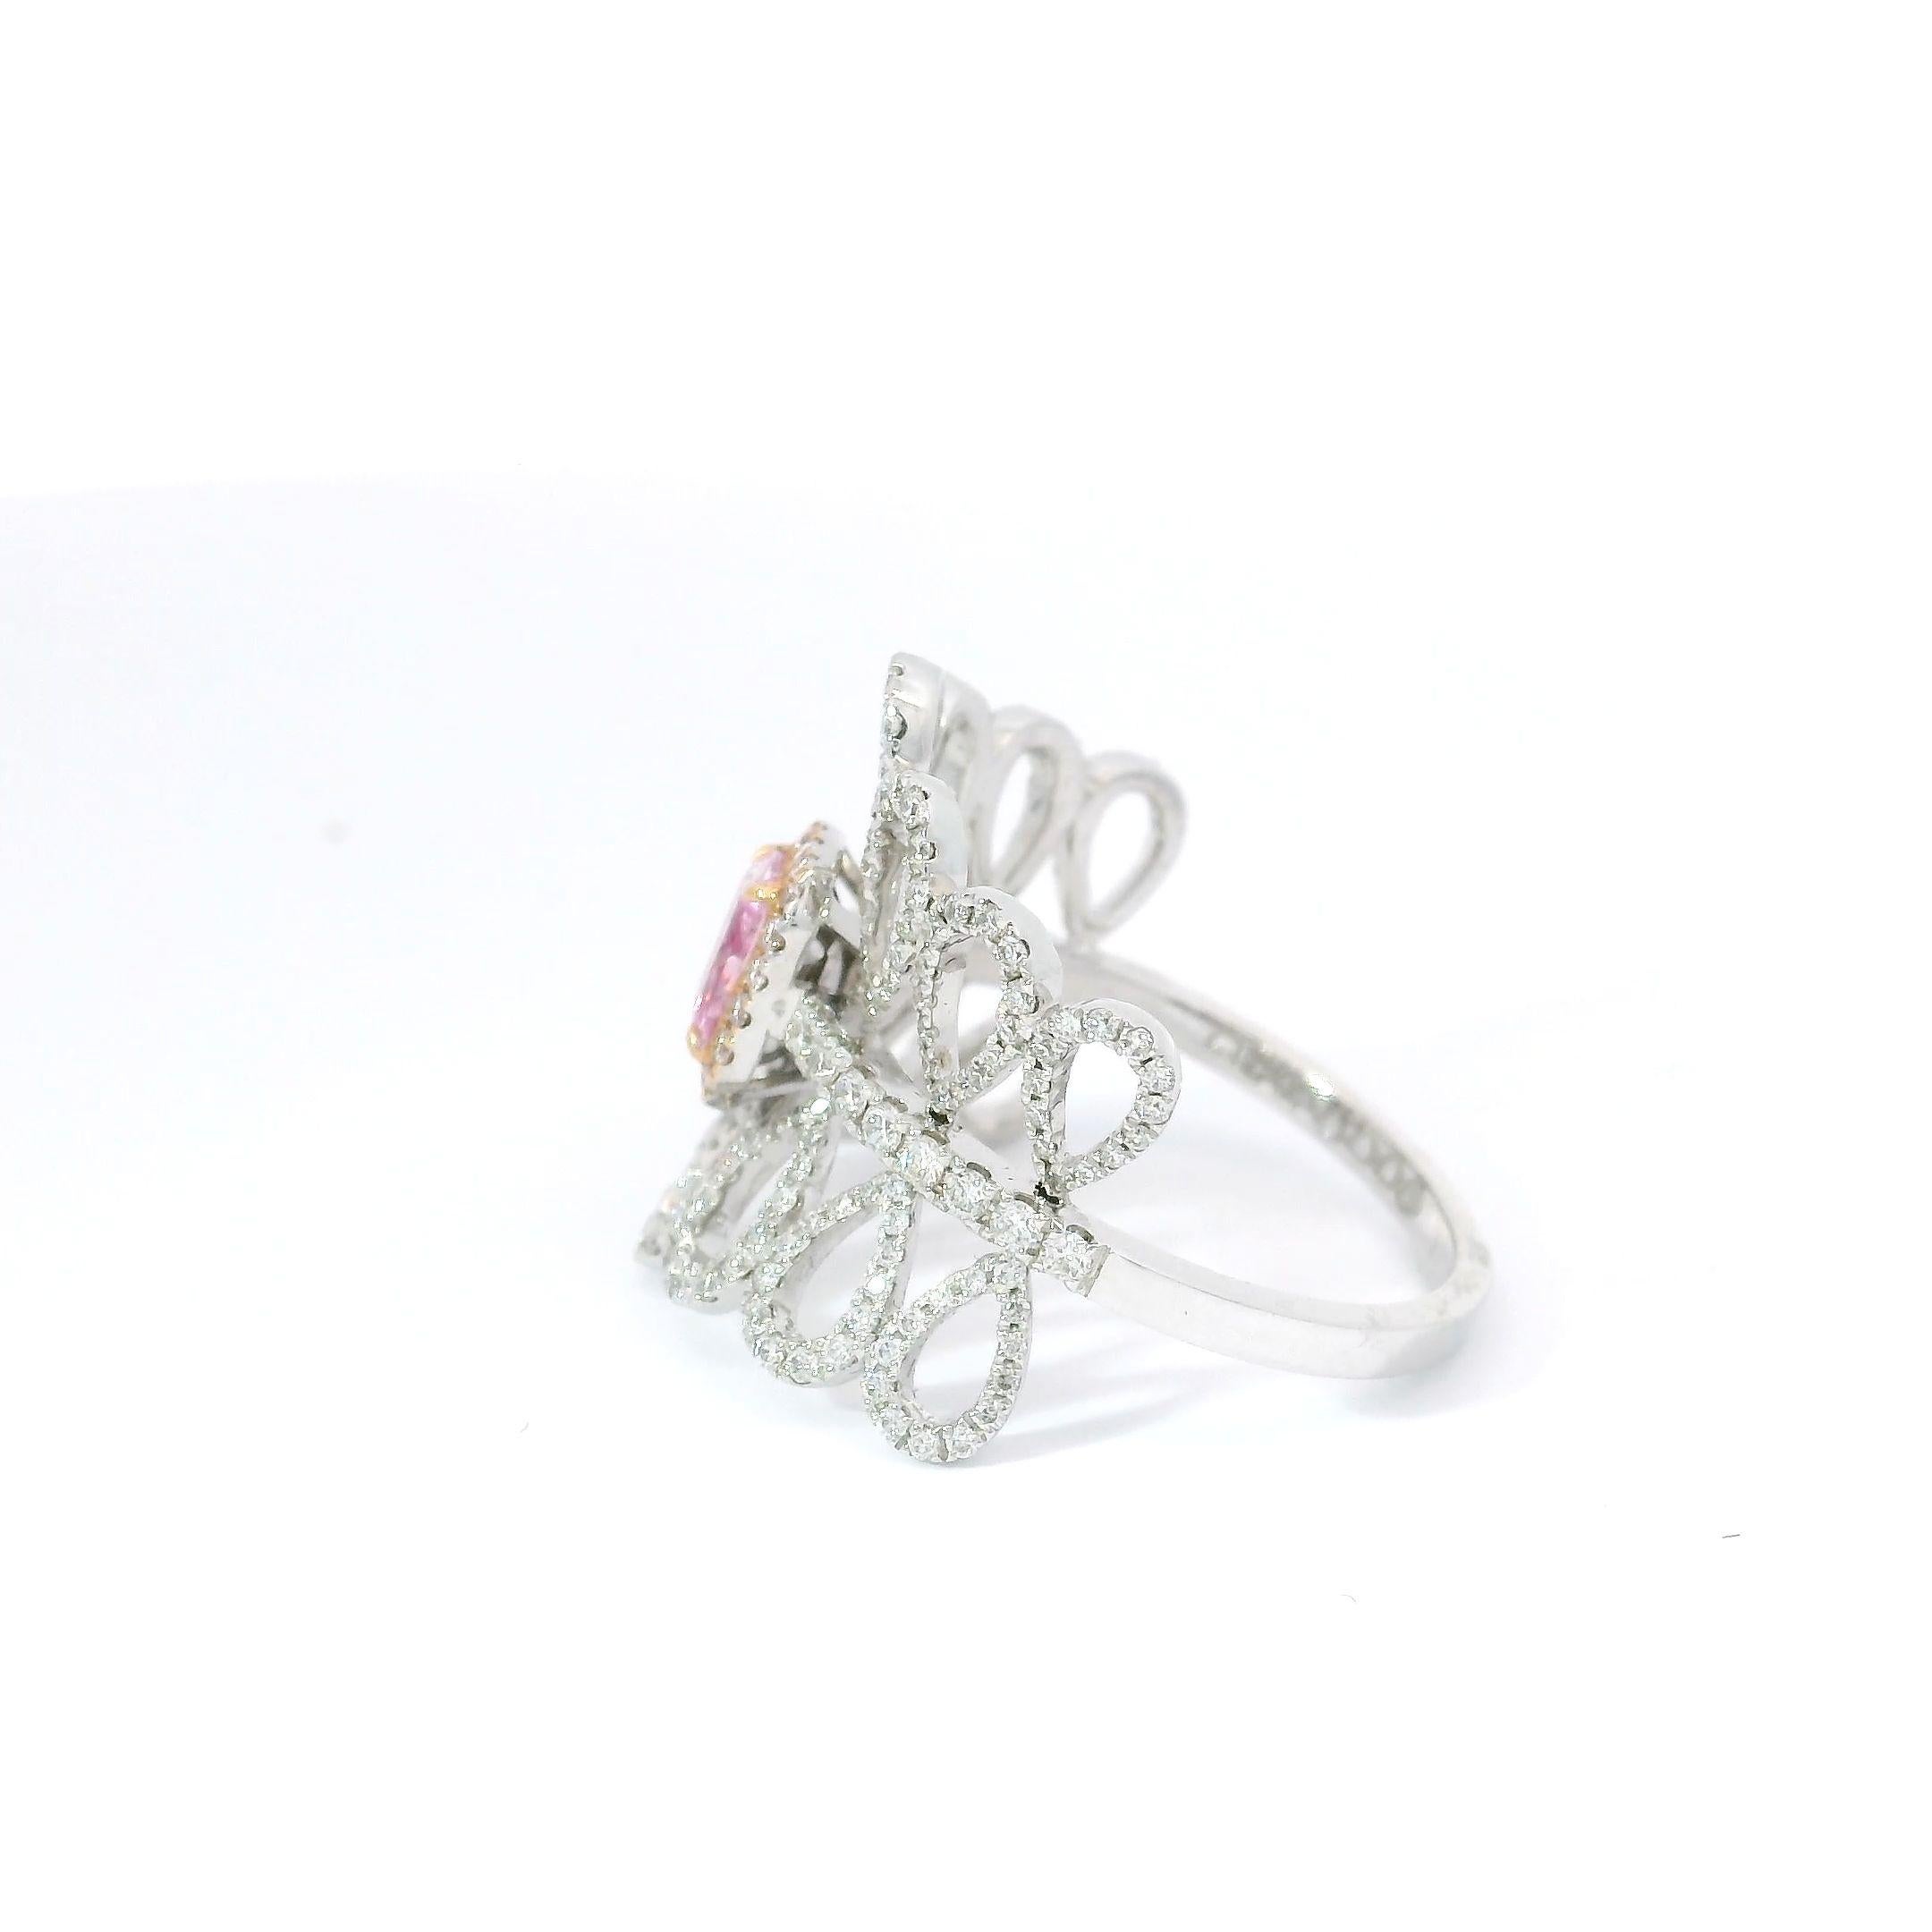 0.40 Carat Very Light Pink Diamond Ring SI2 Clarity GIA Certified For Sale 5